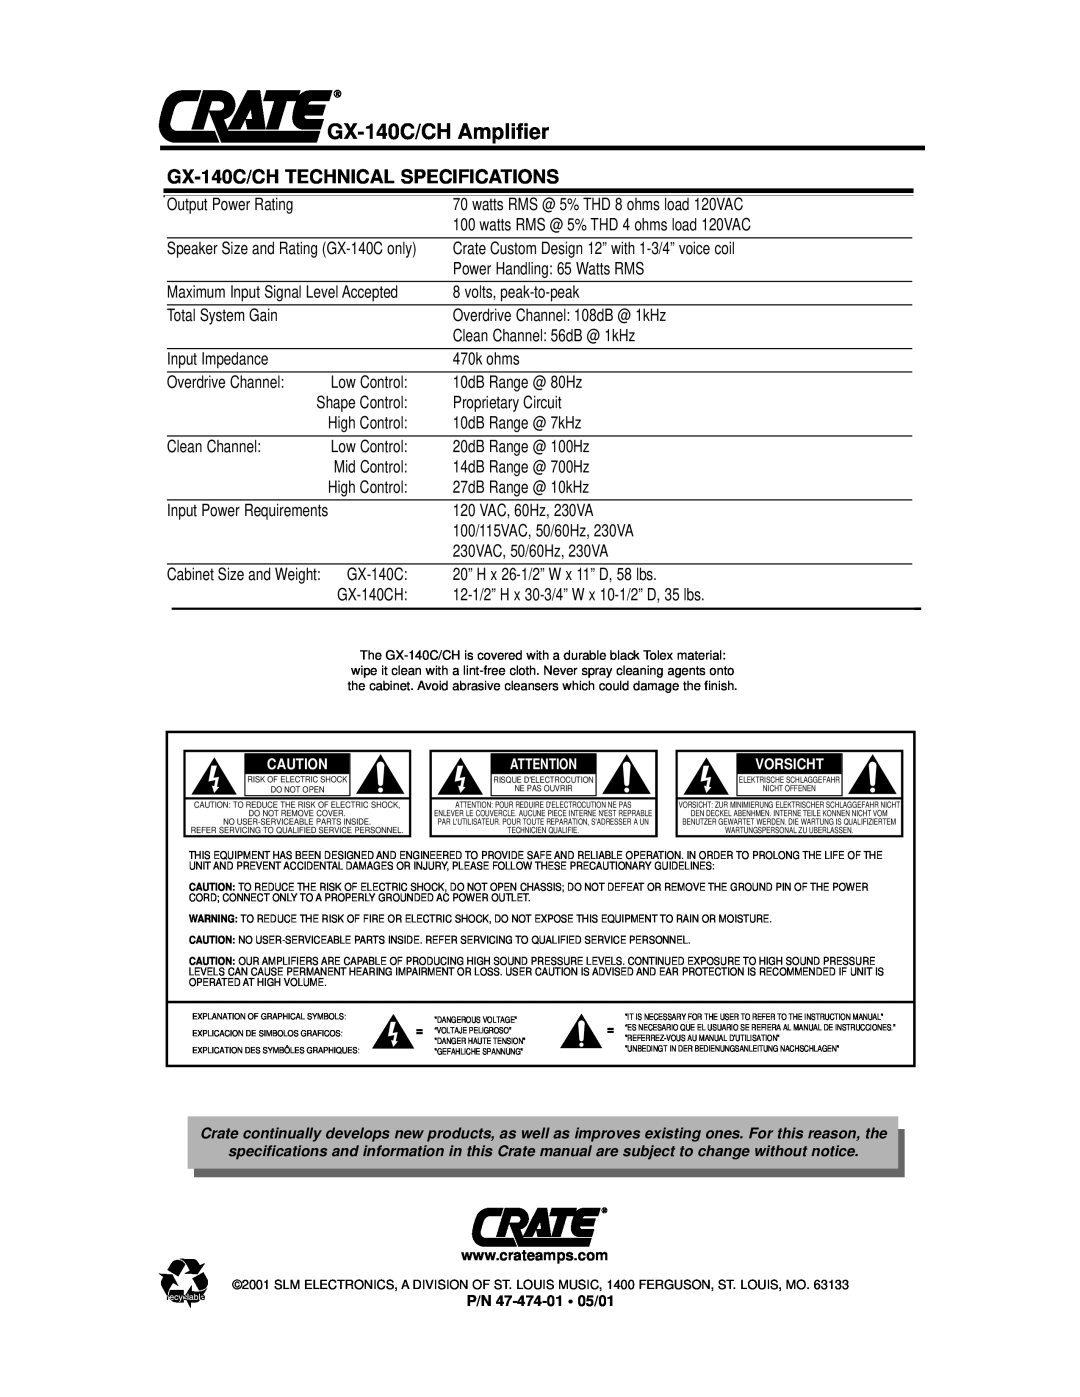 Crate Amplifiers GX-140CH owner manual GX-140C/CHTECHNICAL SPECIFICATIONS, GX-140C/CHAmplifier 